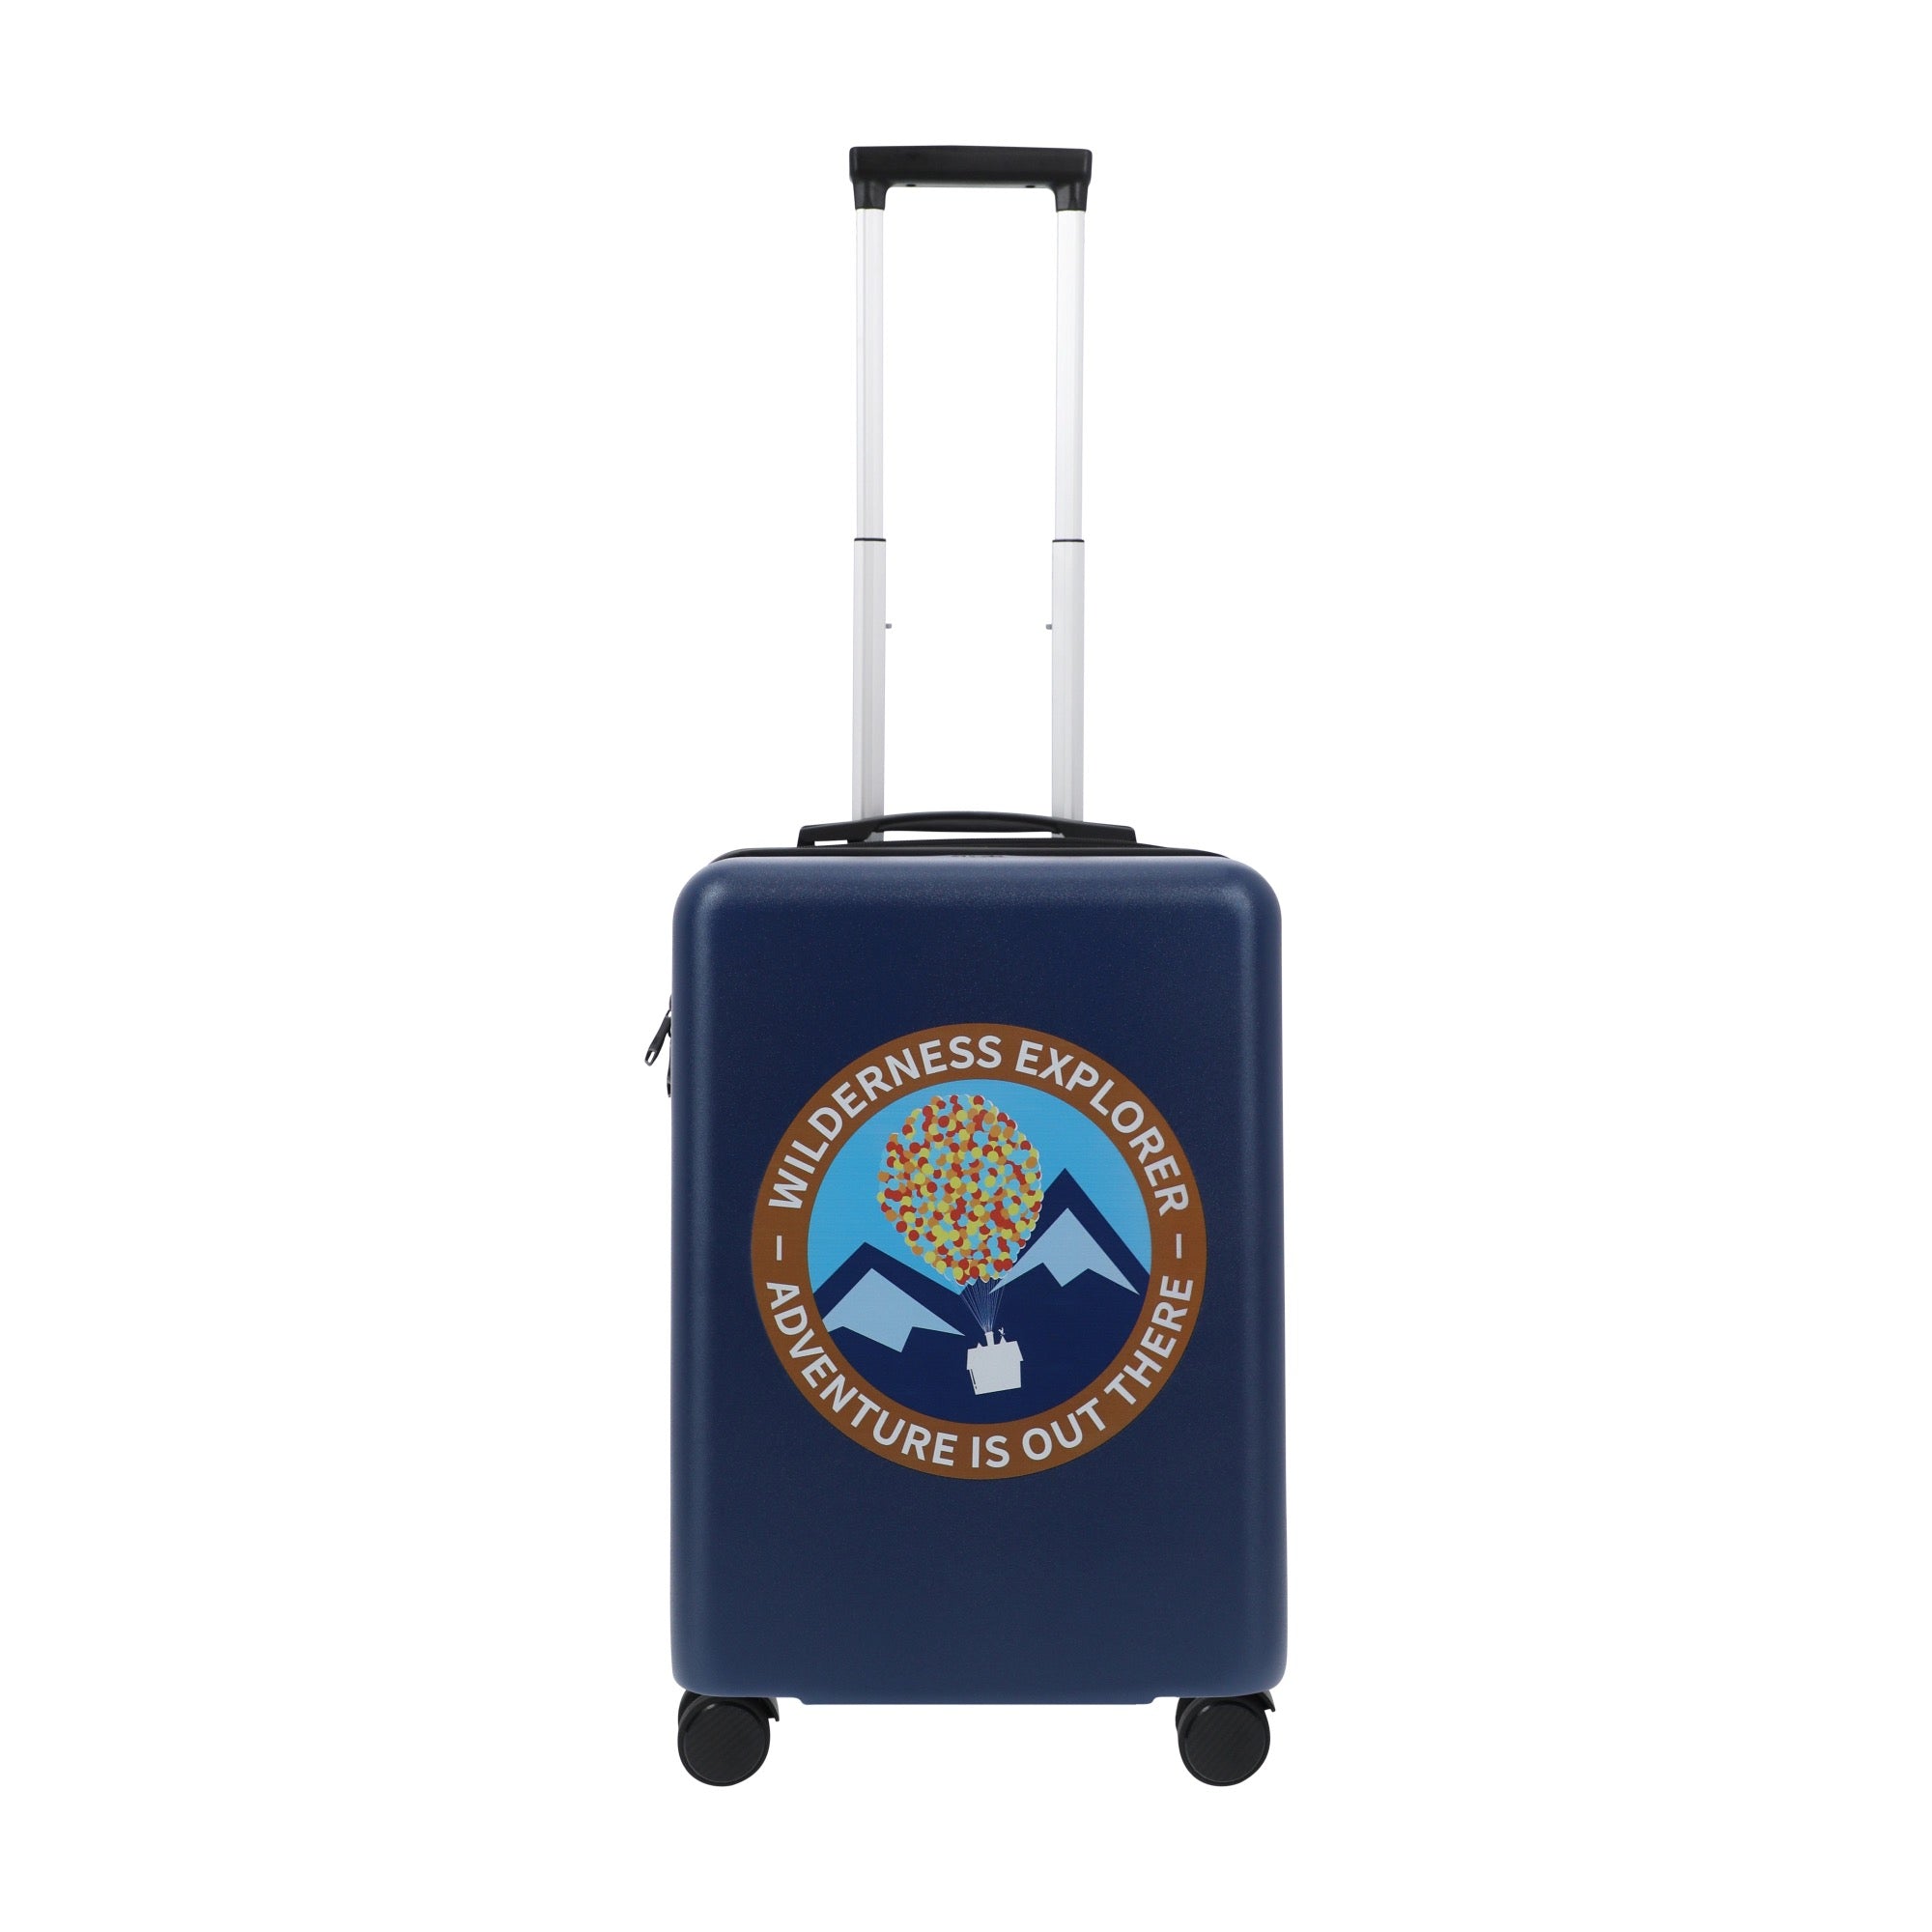 Navy blue disney up 22.5" carry-on spinner suitcase luggage by Ful